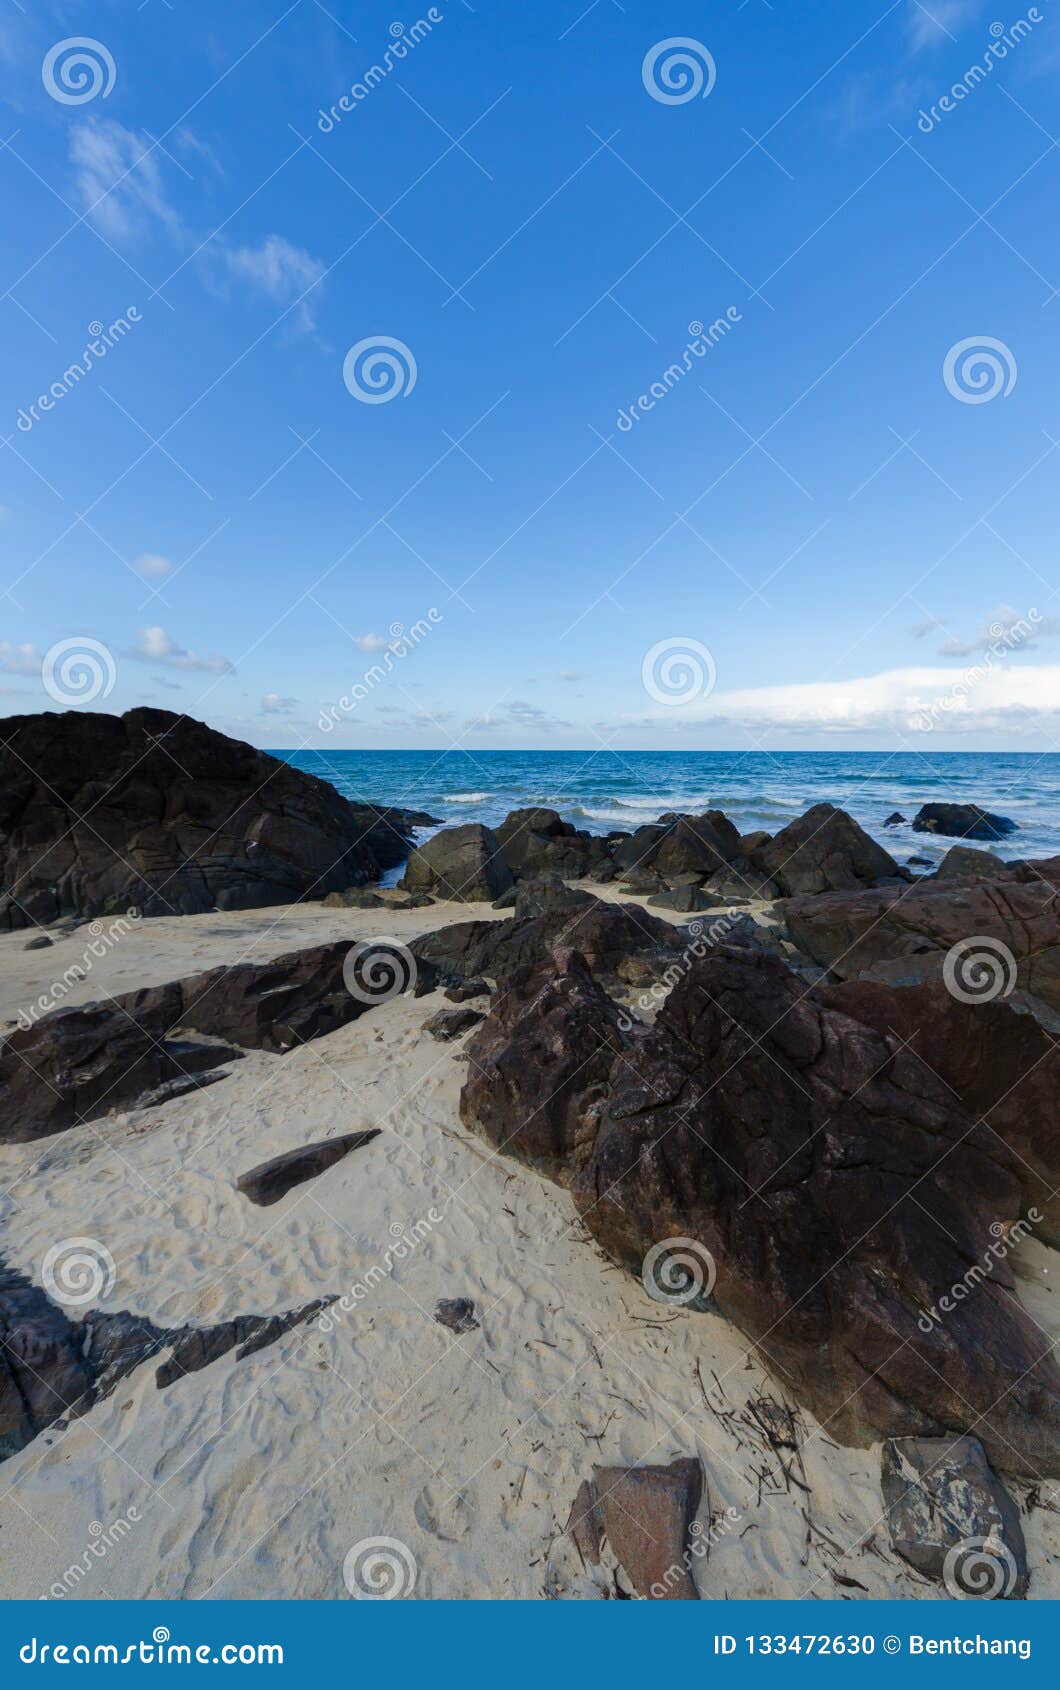 Natural Tropical Beach Blue Sky With Rock Stone As Foreground Stock Photo Image Of Water